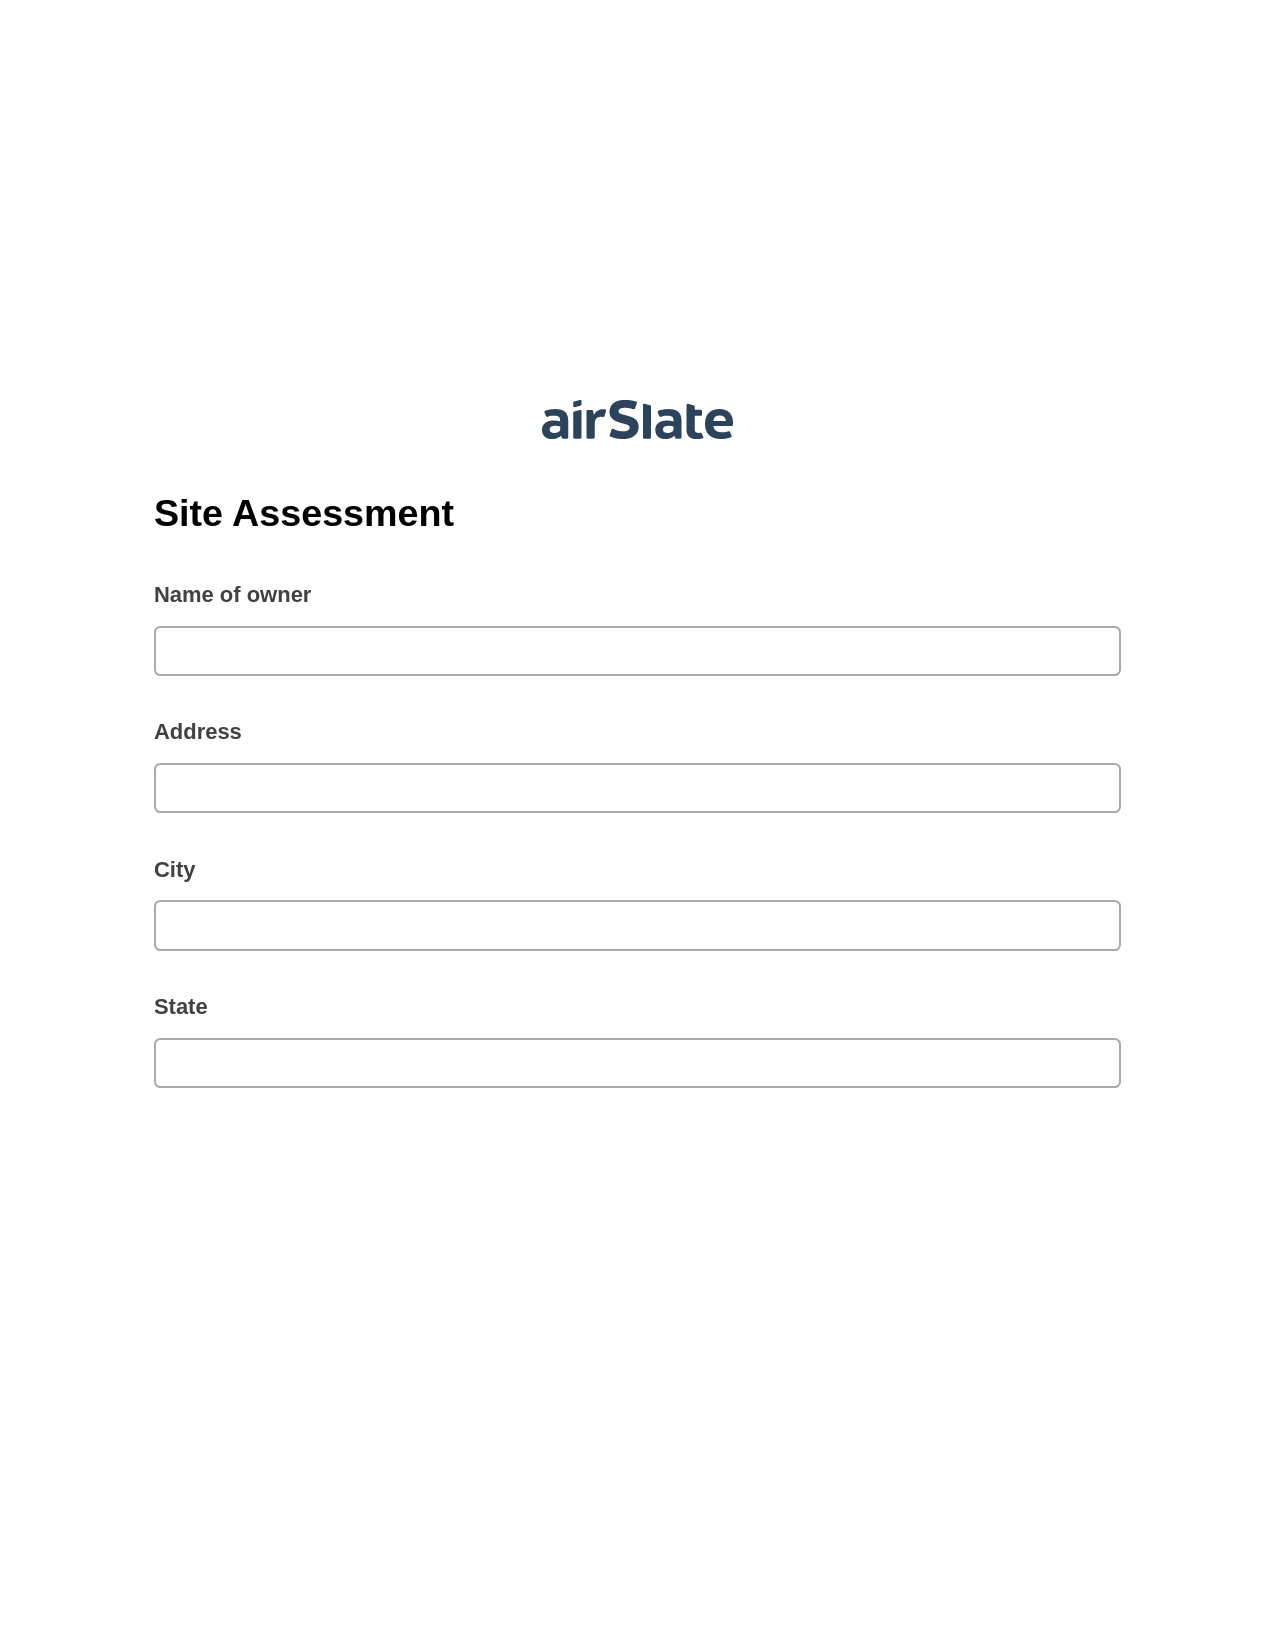 Multirole Site Assessment Pre-fill from Smartsheet Bot, In-person Signing Bot, Export to Excel 365 Bot